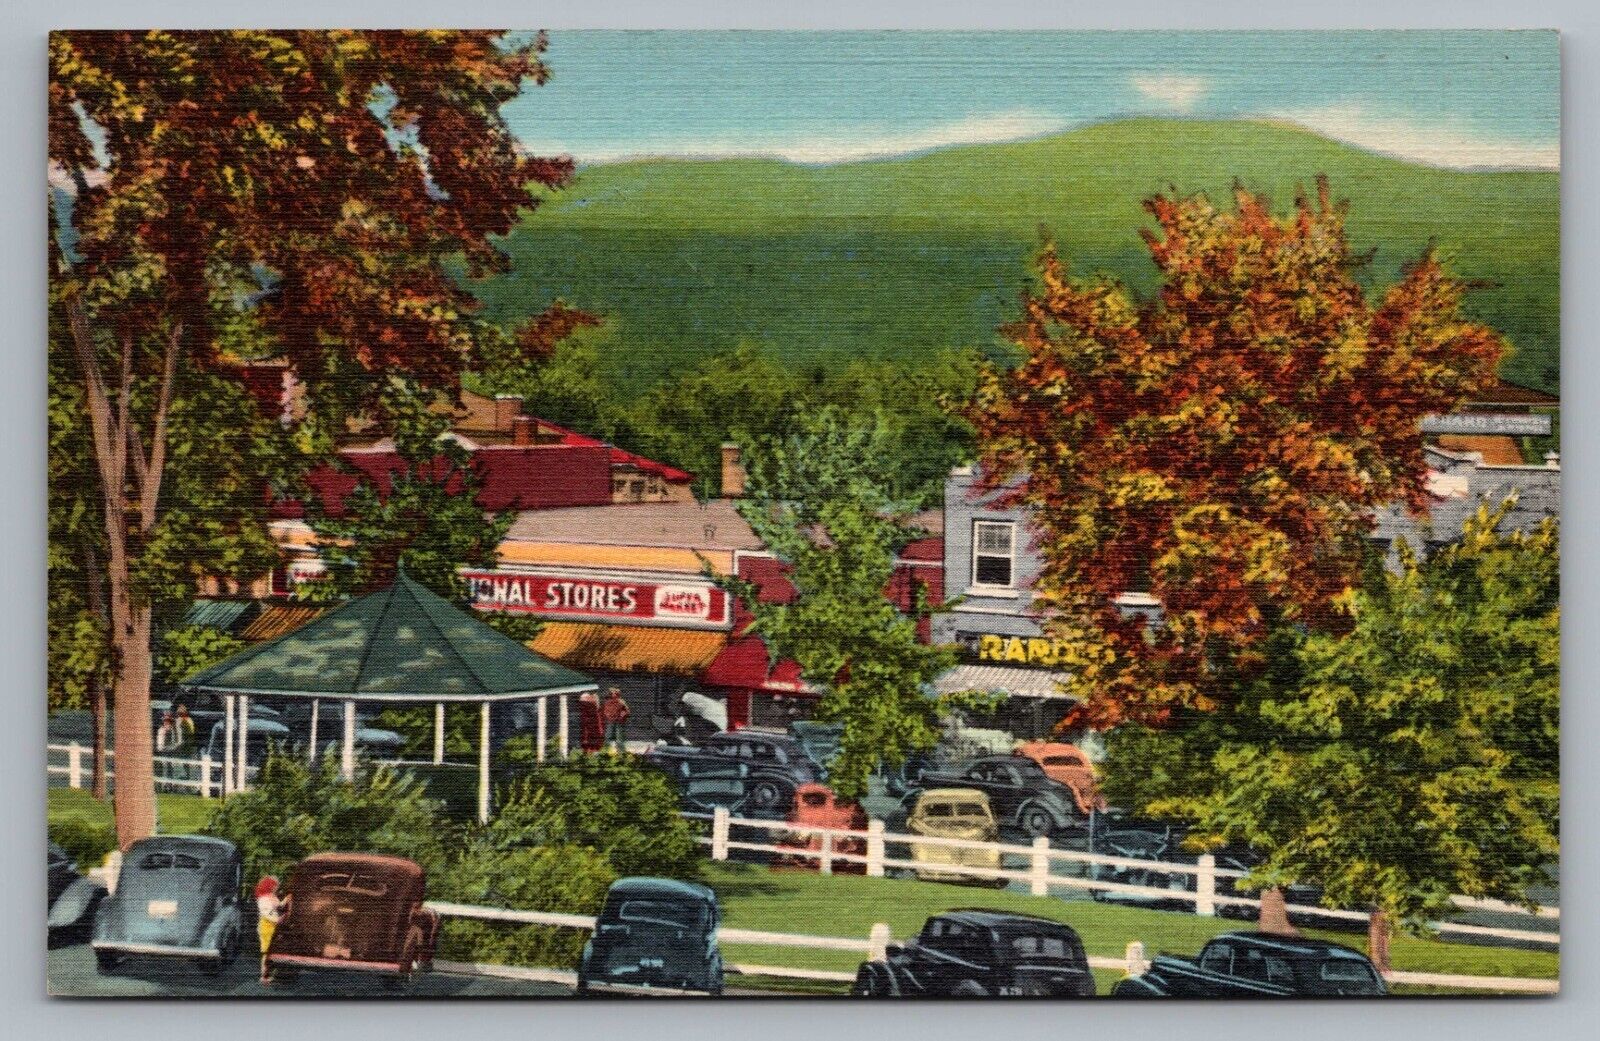 Plymouth NH Common Main Street East Stores Signs Antique Cars Postcard Vtg D7